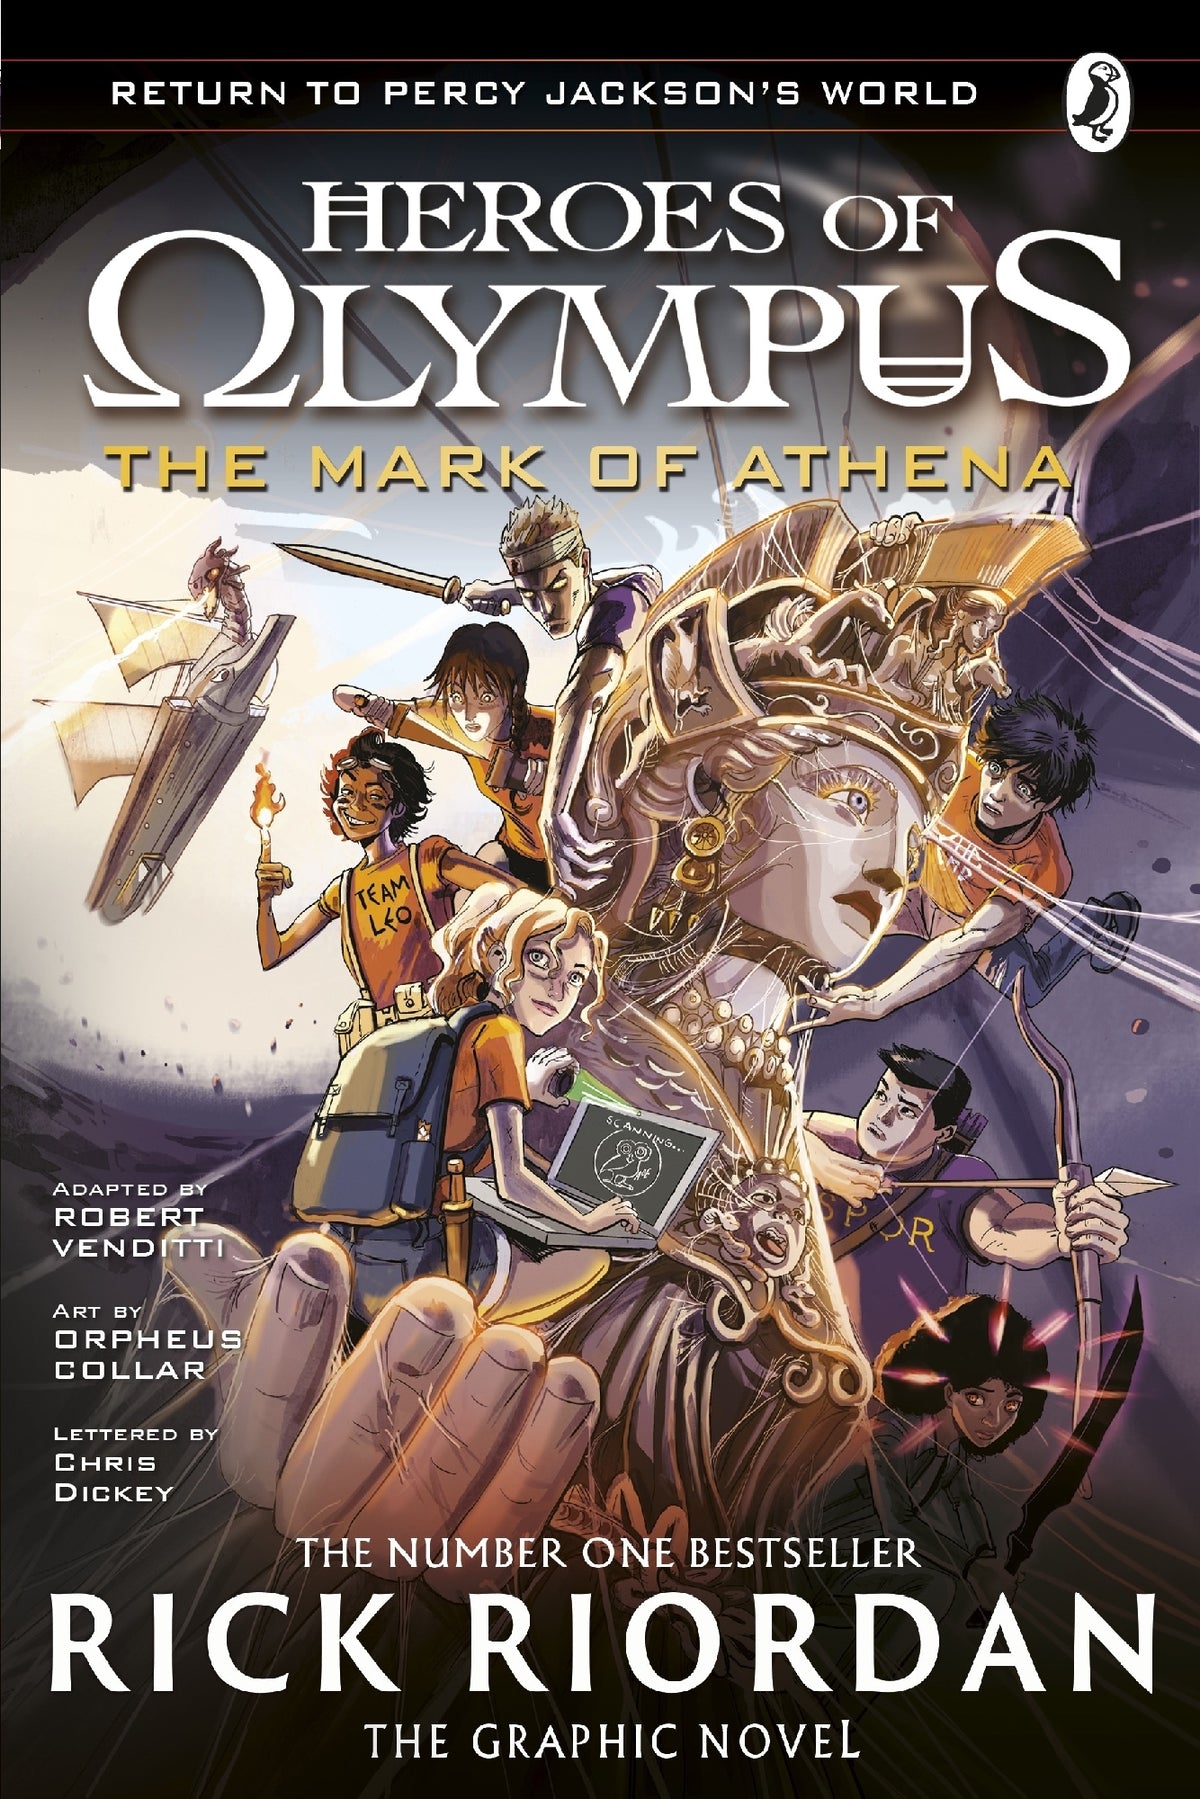 Heroes of Olympus #3: The Mark of Athena: The Graphic Novel